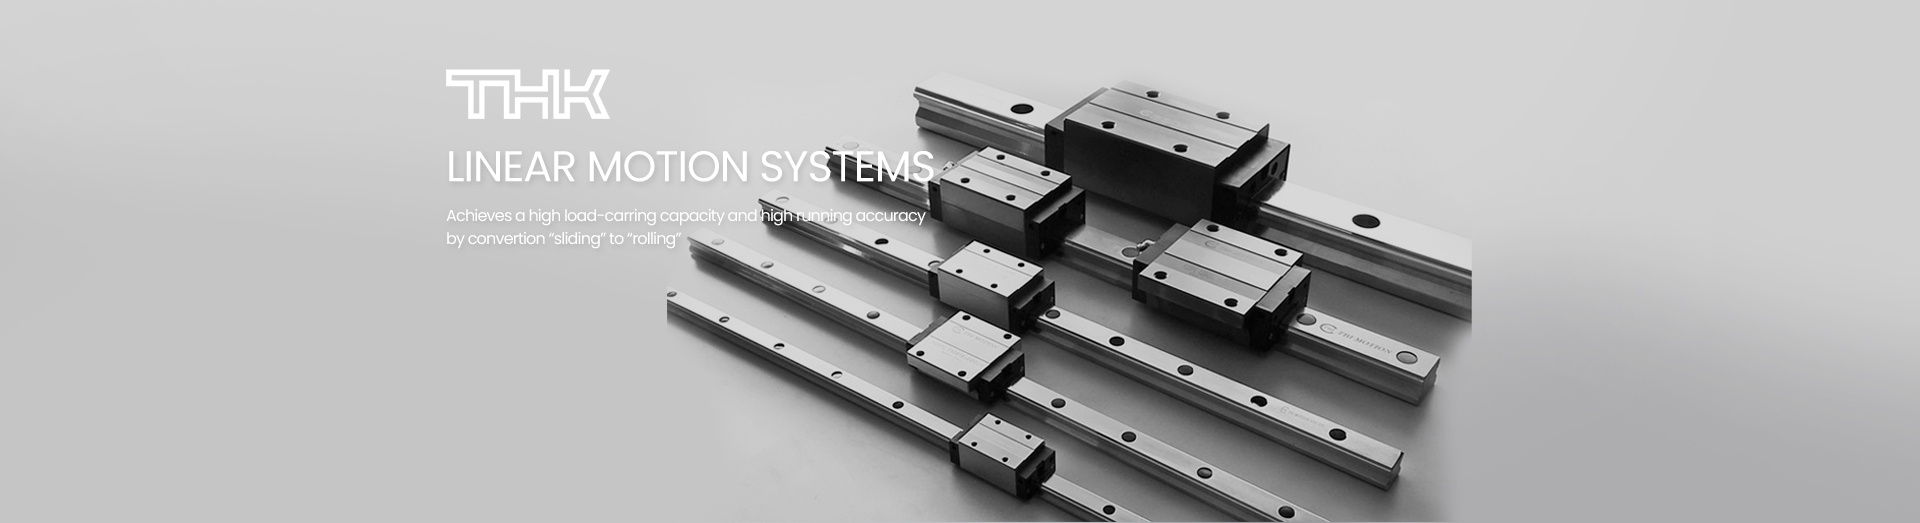 THK - Linear Motion Systems